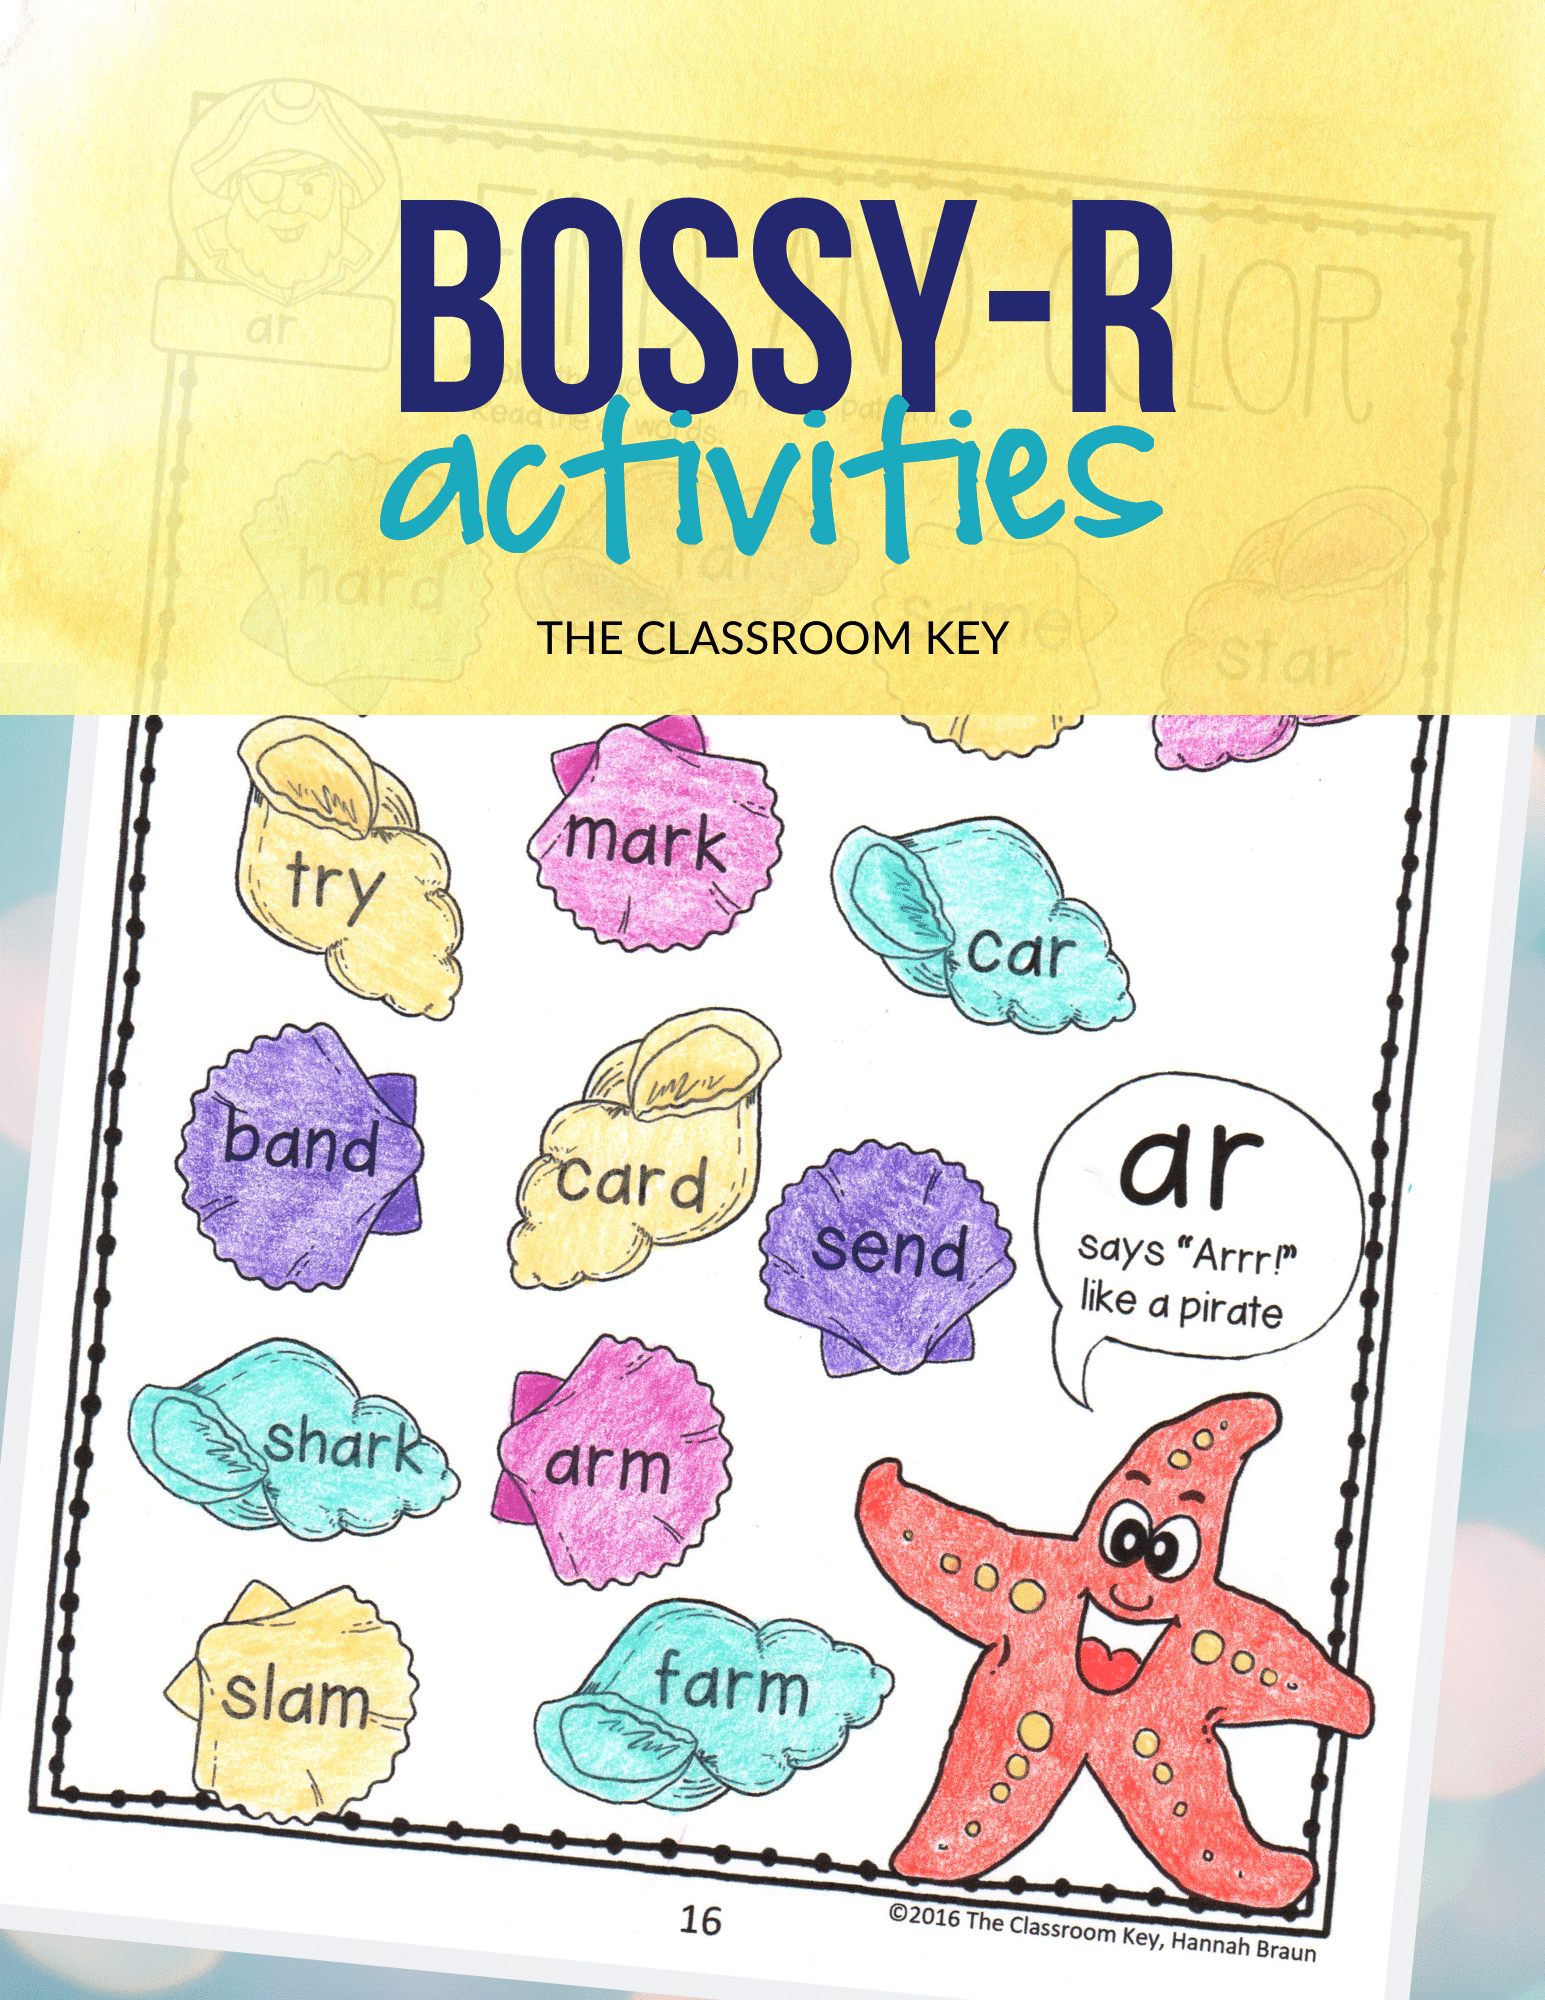 Improve reading skills with r controlled vowel, or bossy r worksheets, a mini book, posters, words sorts, and an assessment. Perfect for 1st or 2nd graders. Addresses Common Core Standards RF.2.3.B and RF.1.3.D